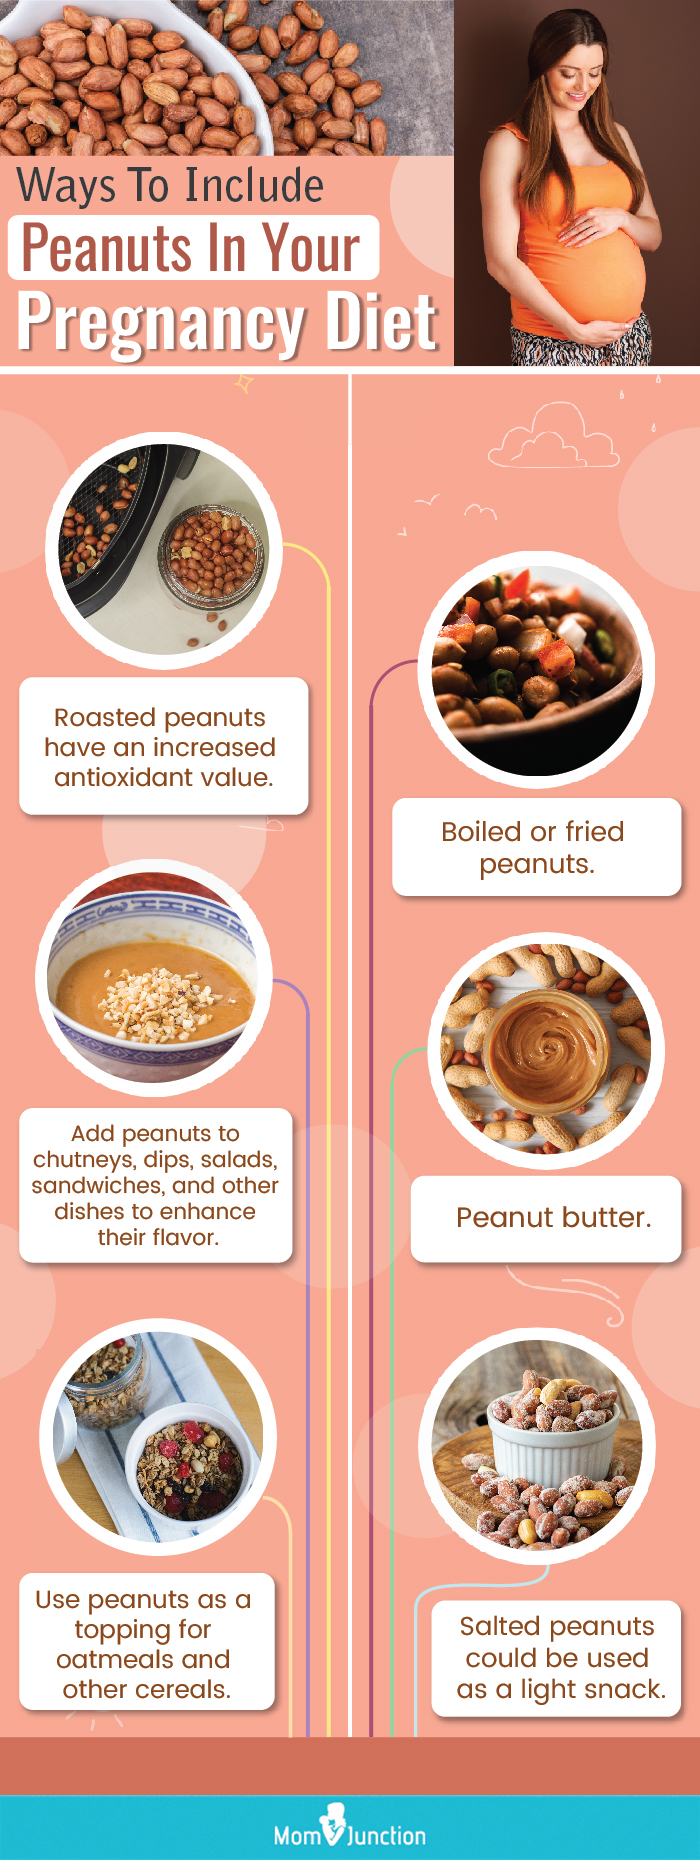 ways to eat peanuts during pregnancy [infographic]